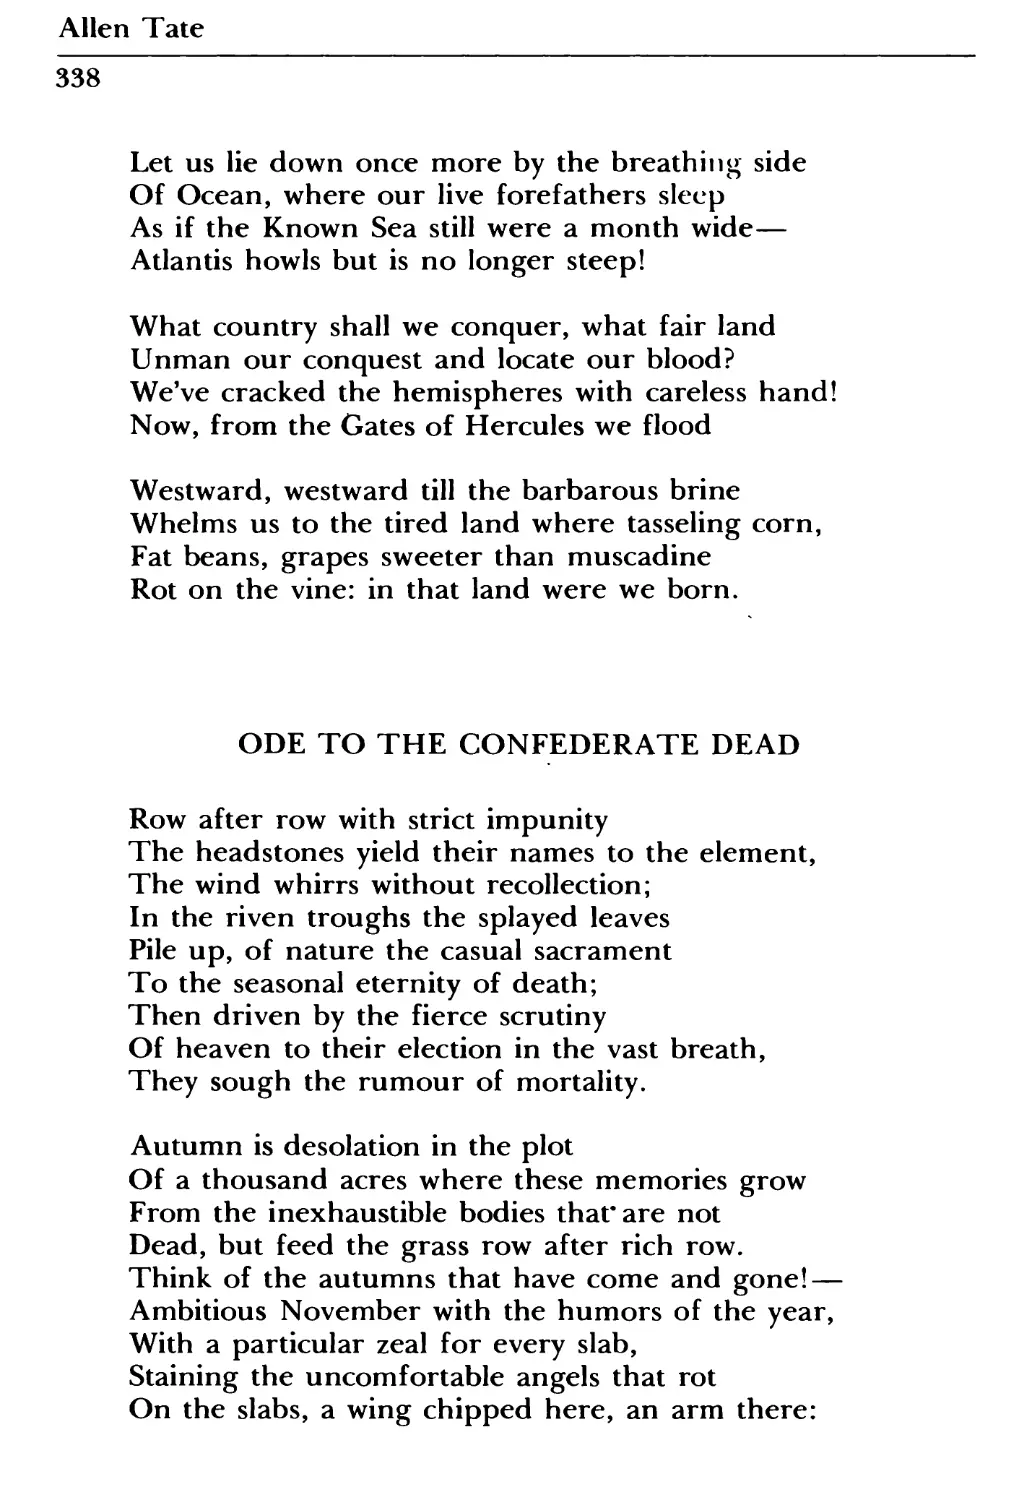 Ode to the Confederate Dead